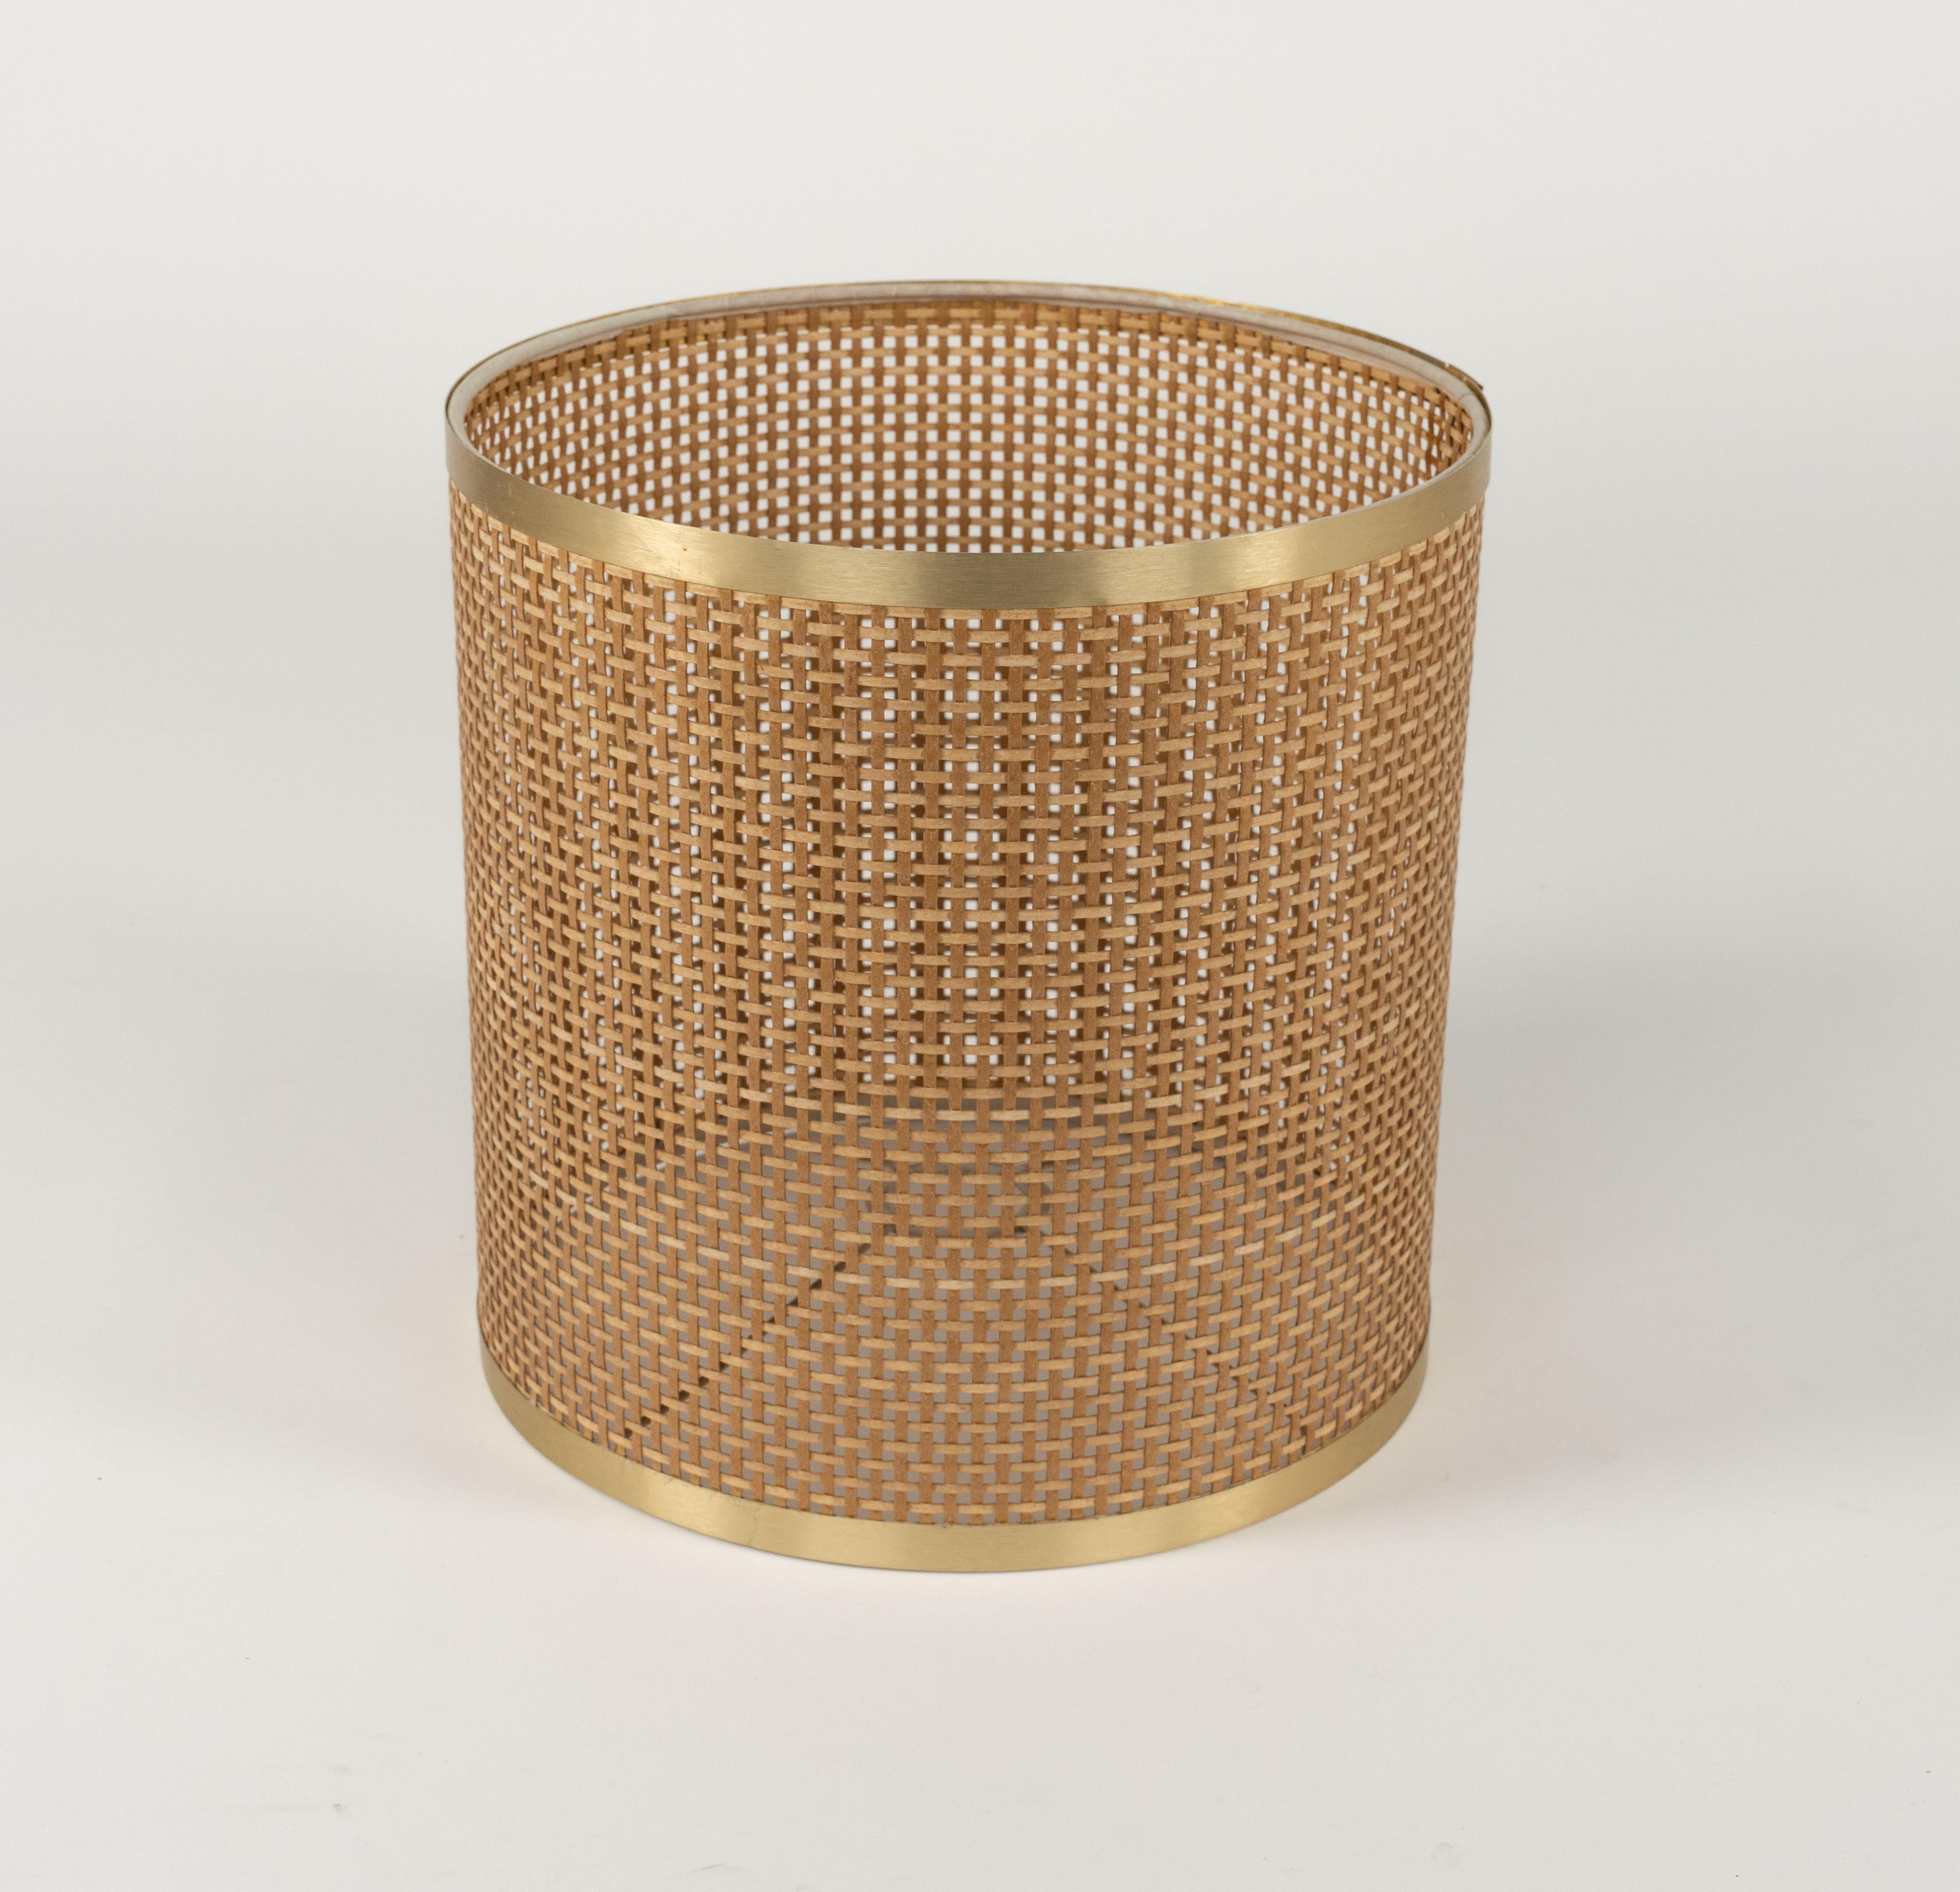 Midcentury Rattan, Wicker and Chrome Table Lamp by Vivai Del Sud, Italy 1970s For Sale 10